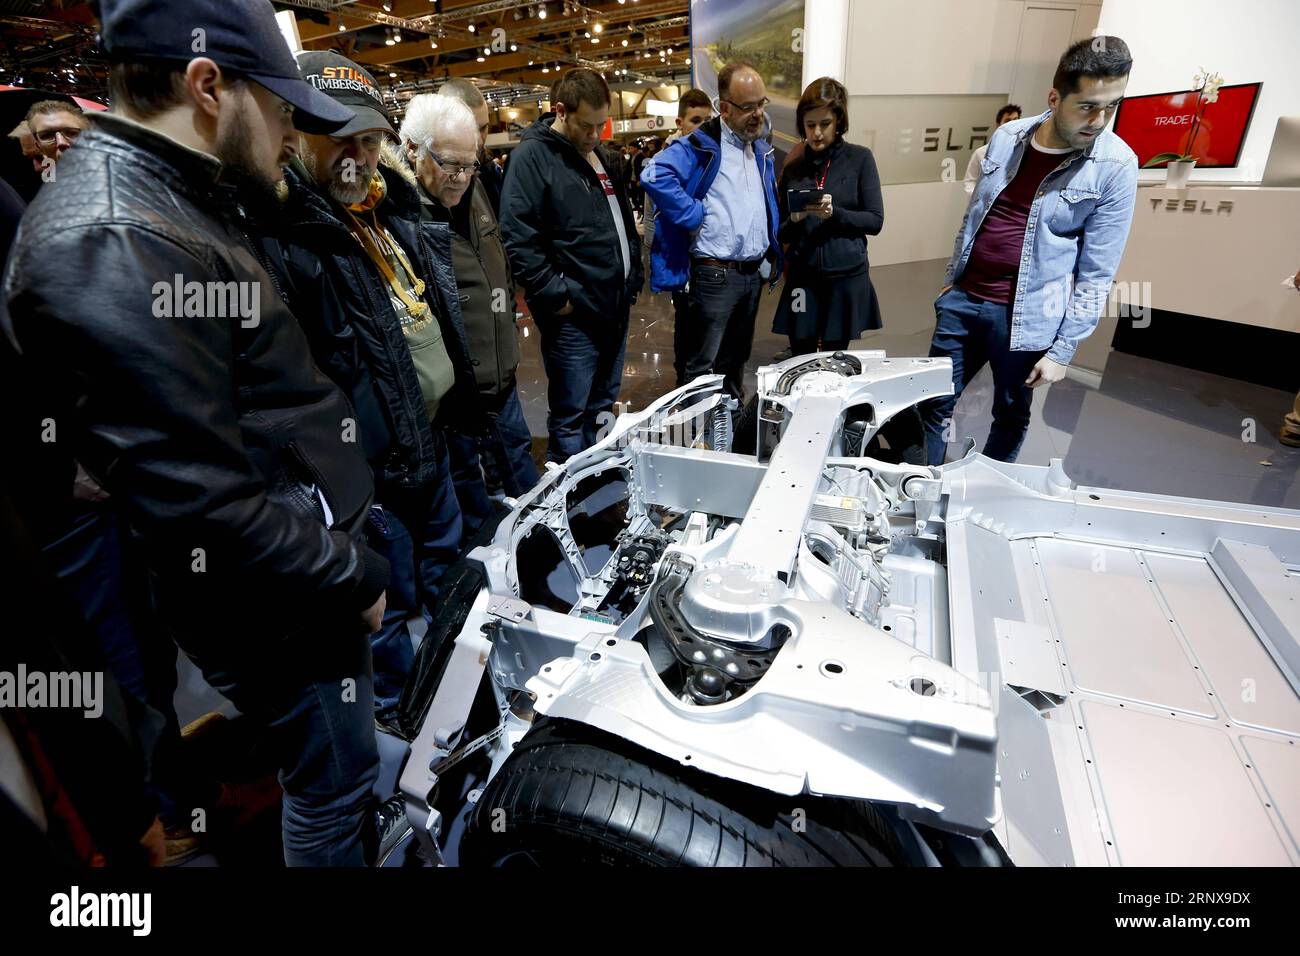 (180118) -- BRUSSELS, Jan. 18, 2018 -- Visitors look on a chassis of Tesla during the 96th European Motor Show in Brussels, Belgium, Jan. 18, 2018. The motor show opened to public from Jan. 12 to 21. )(rh) BELGIUM-BRUSSELS-AUTO-SHOW-ELECTRIC CAR YexPingfan PUBLICATIONxNOTxINxCHN Stock Photo